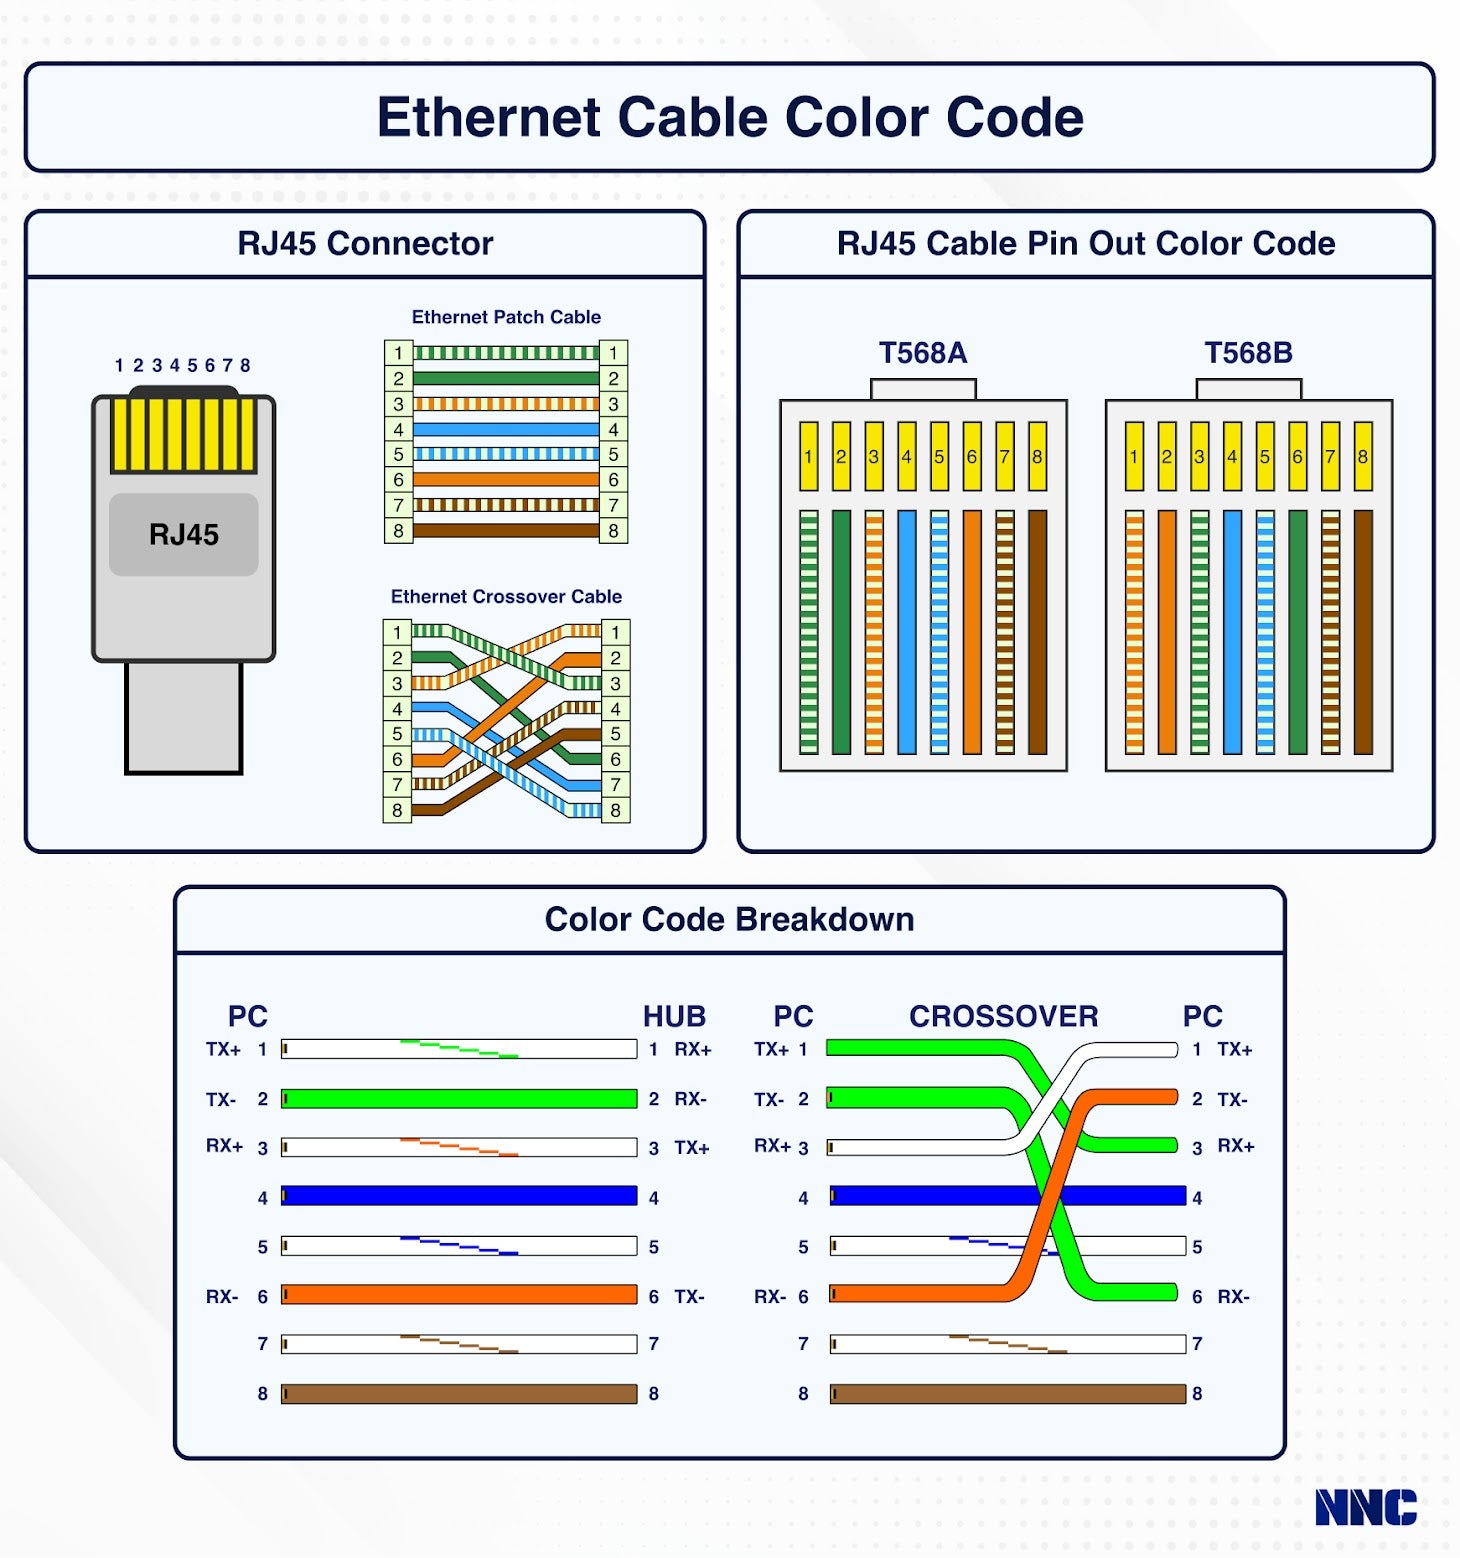 ethernet cable color code, ethernet cable color code pdf, cat 6 ethernet cable color code